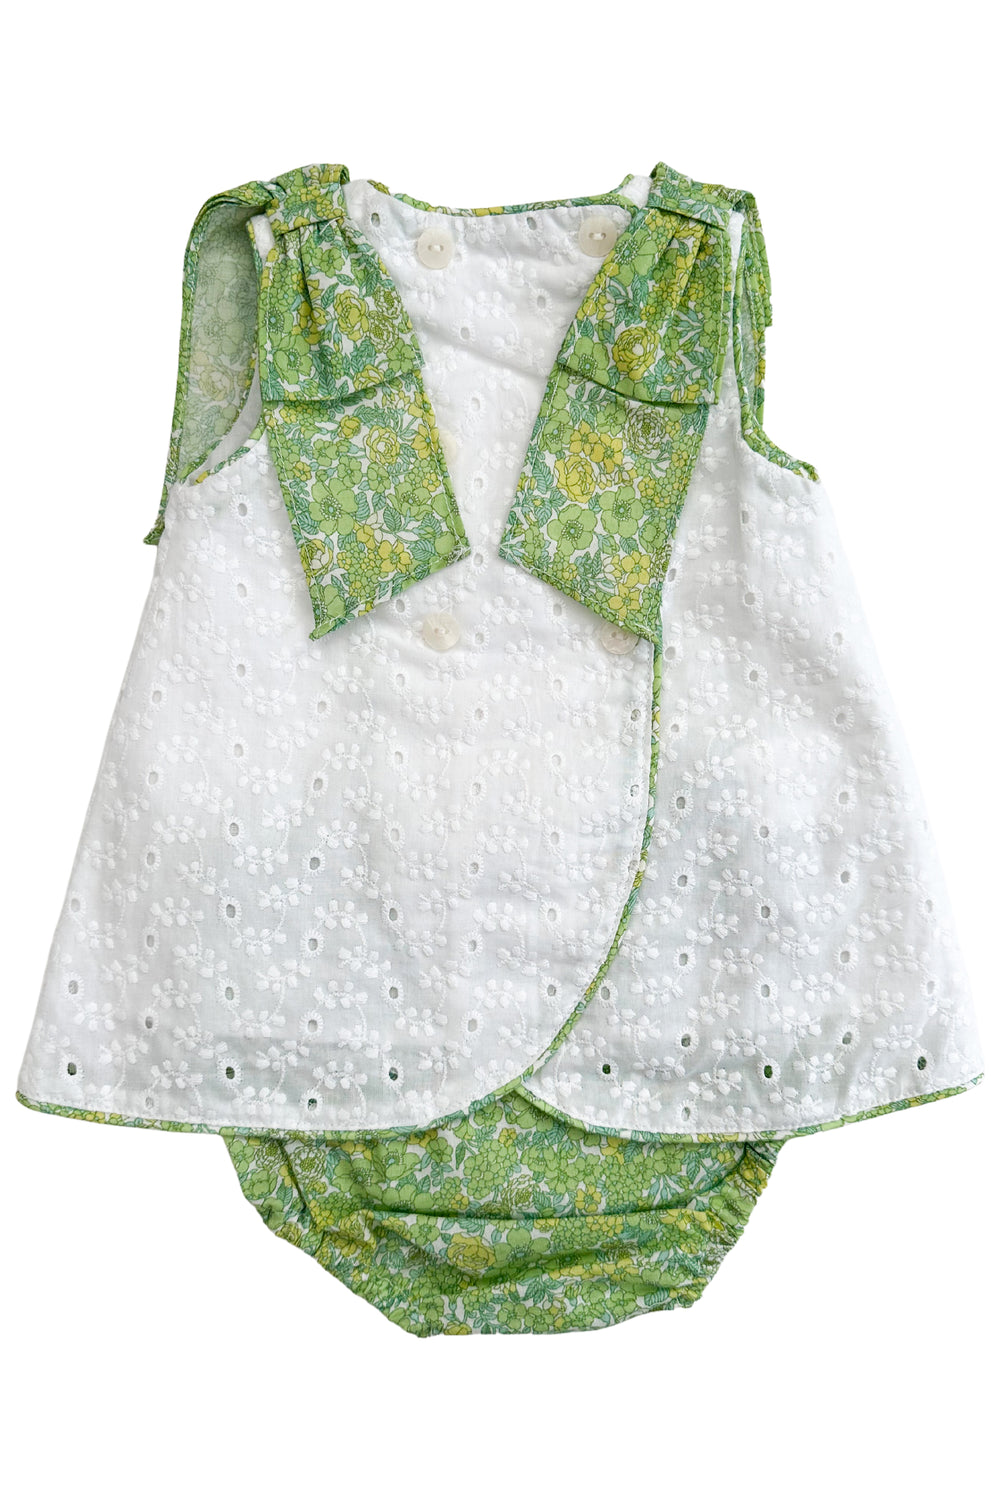 Foque PREORDER "Bluebelle" White & Green Broderie Anglaise Floral Dress & Bloomers | Millie and John